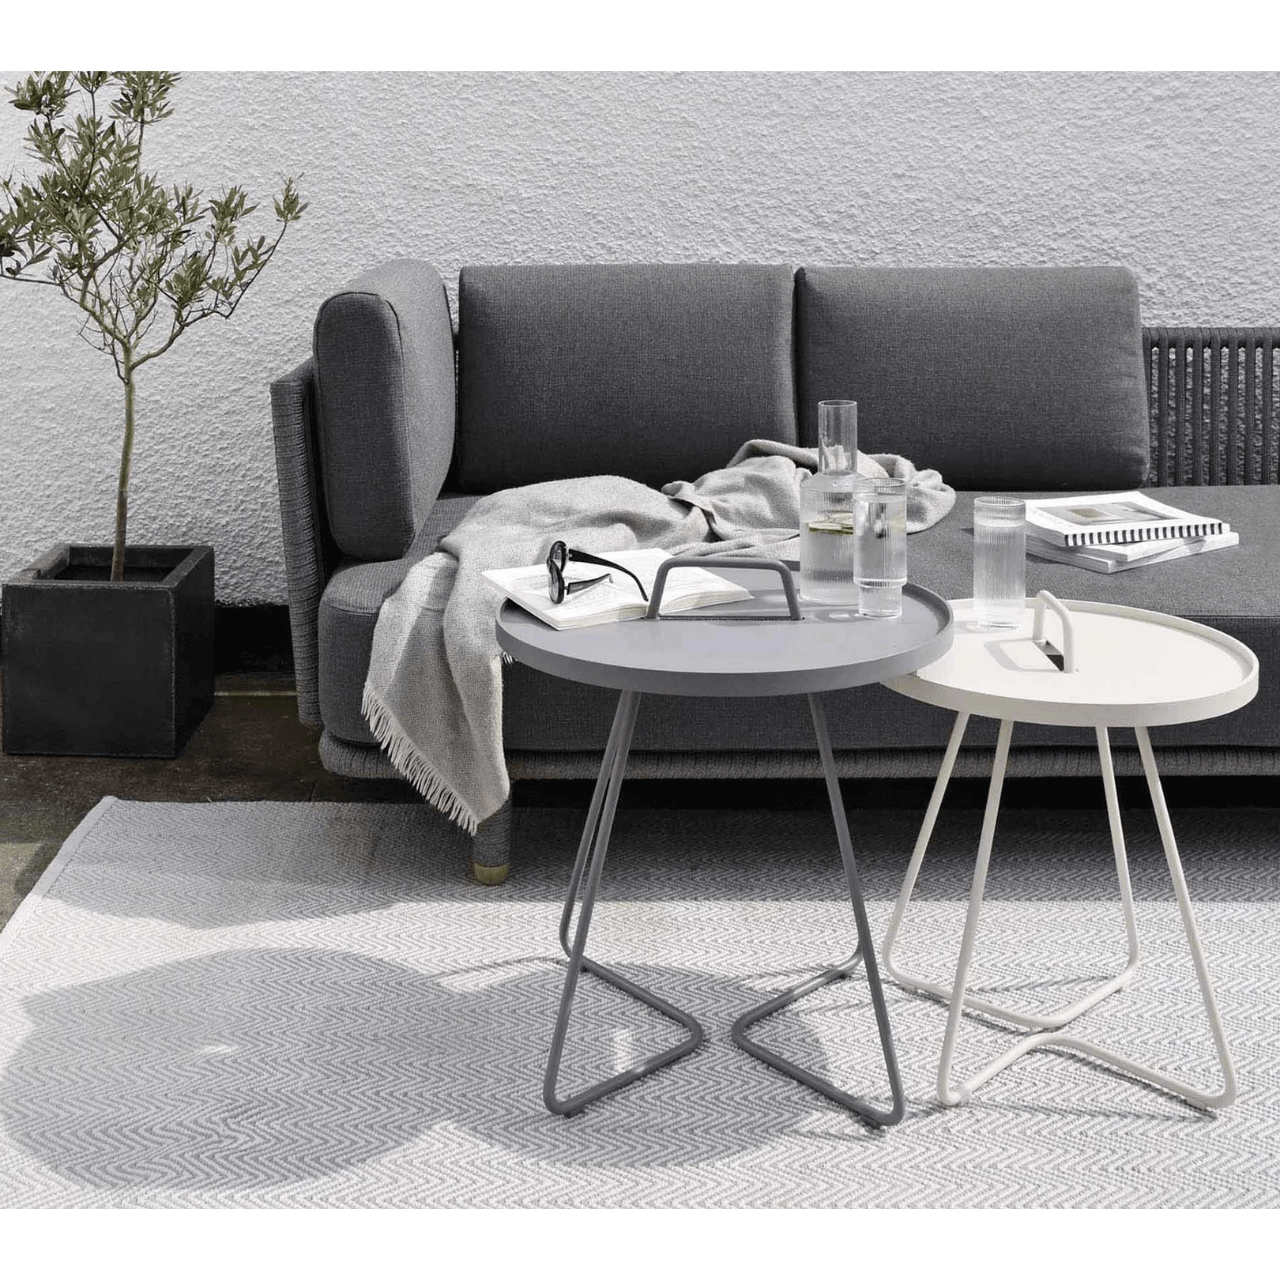 Boxhill's On-The-Move light grey and white outdoor round side table infront of charcoal grey 3-seater outdoor sofa placed in patio